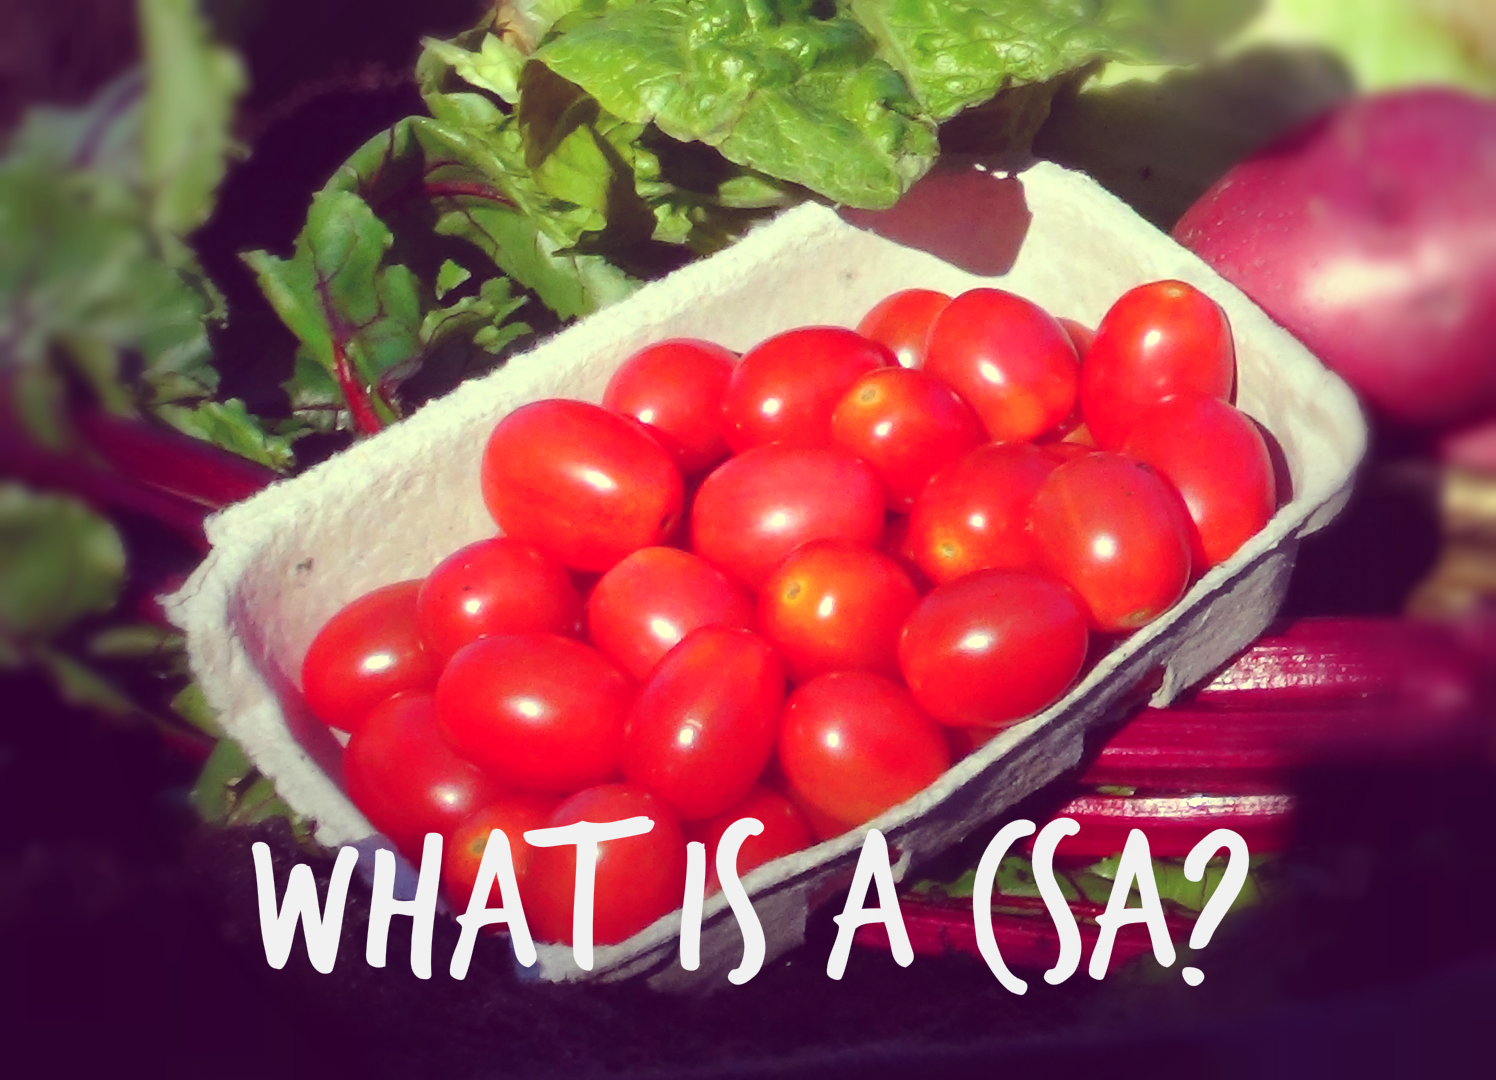 what is a csa